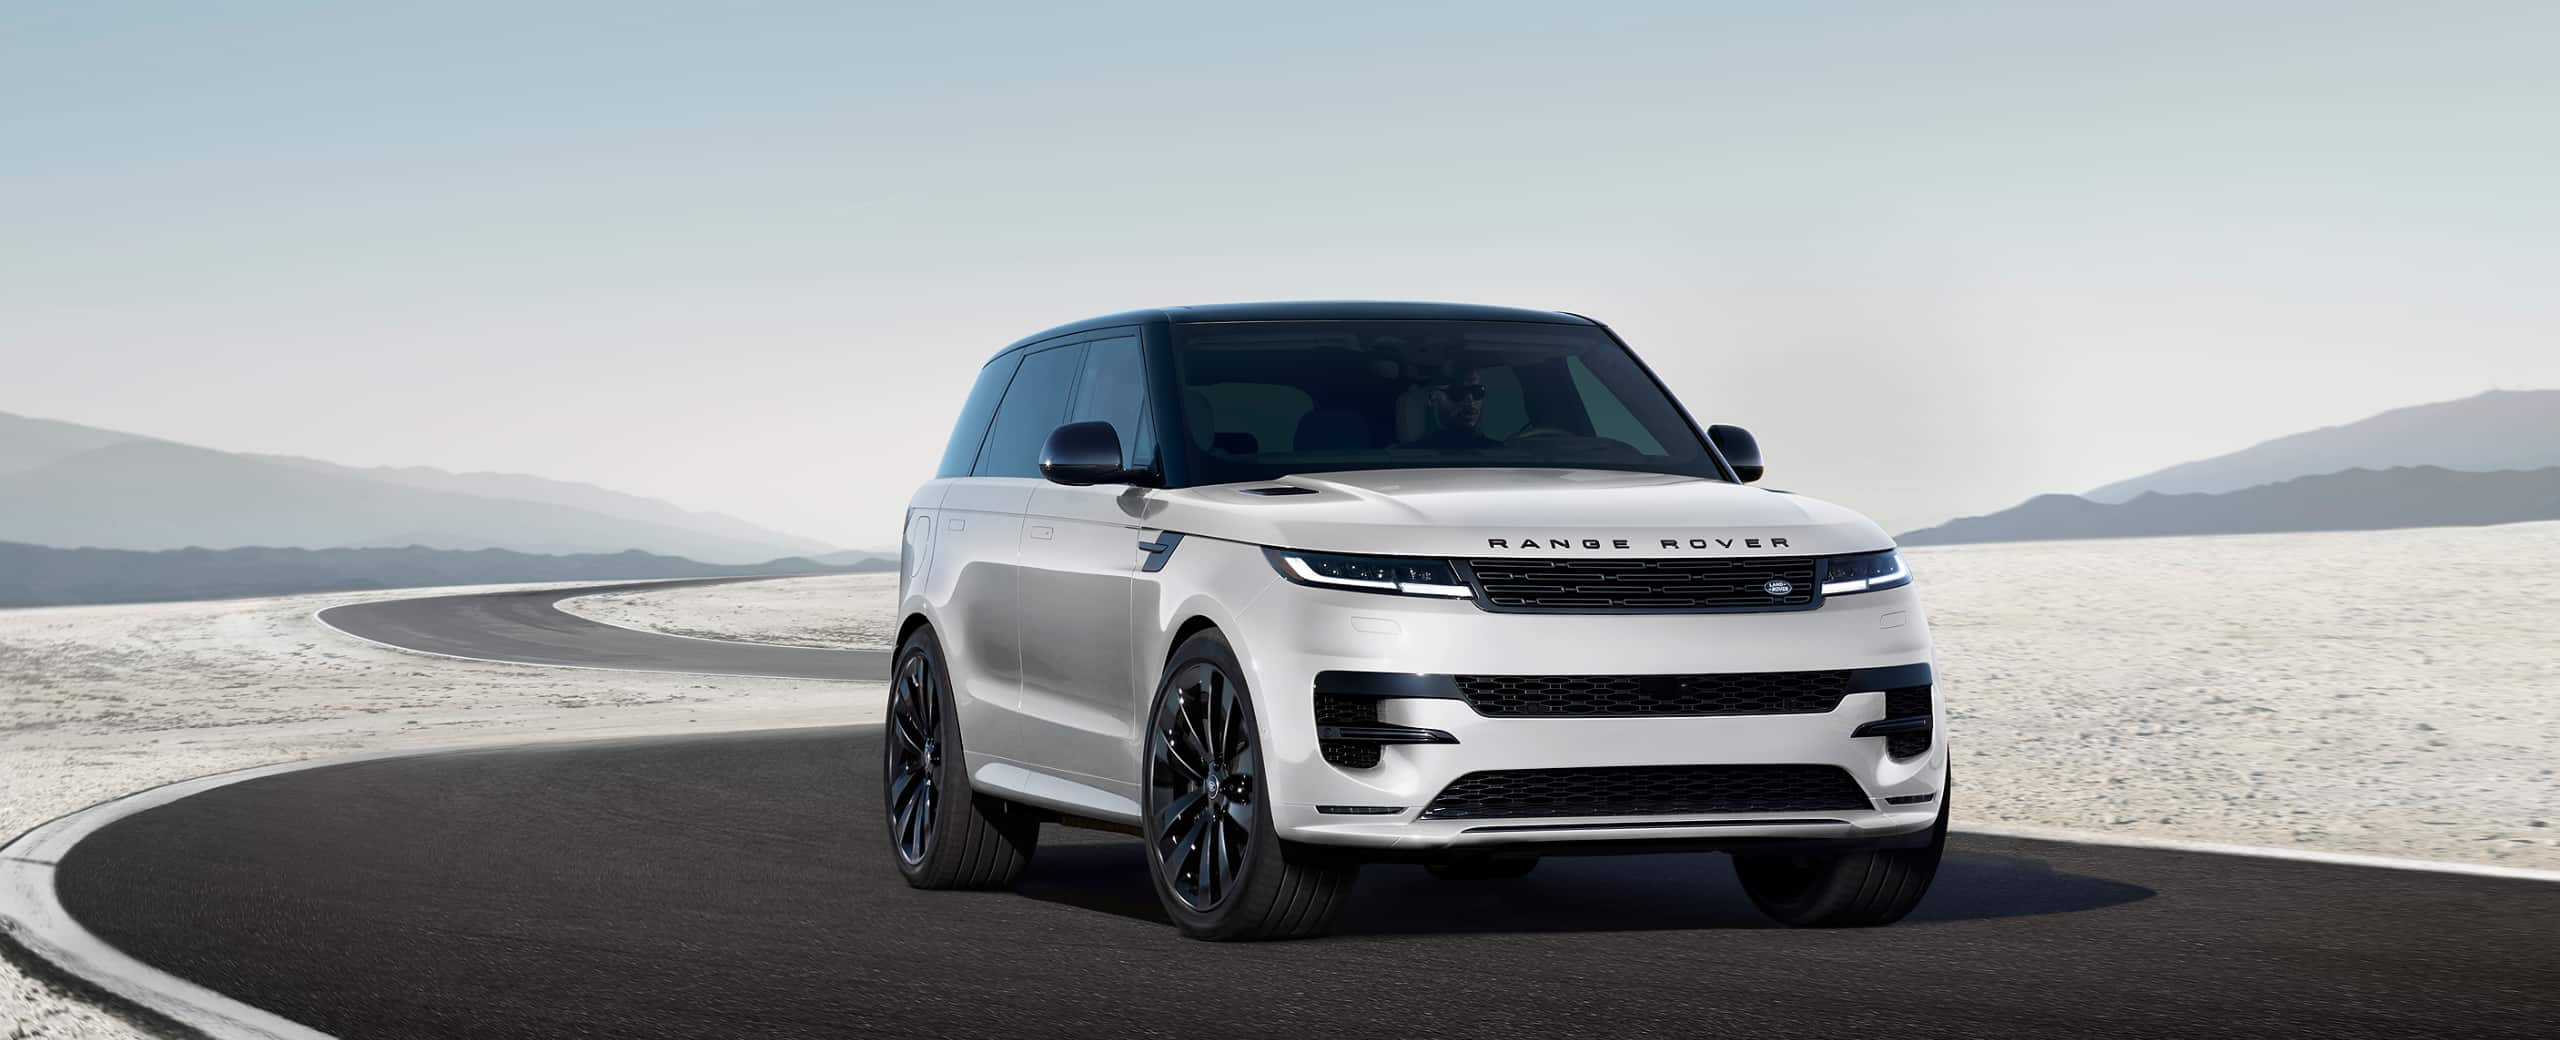 what is an autobiography range rover sport